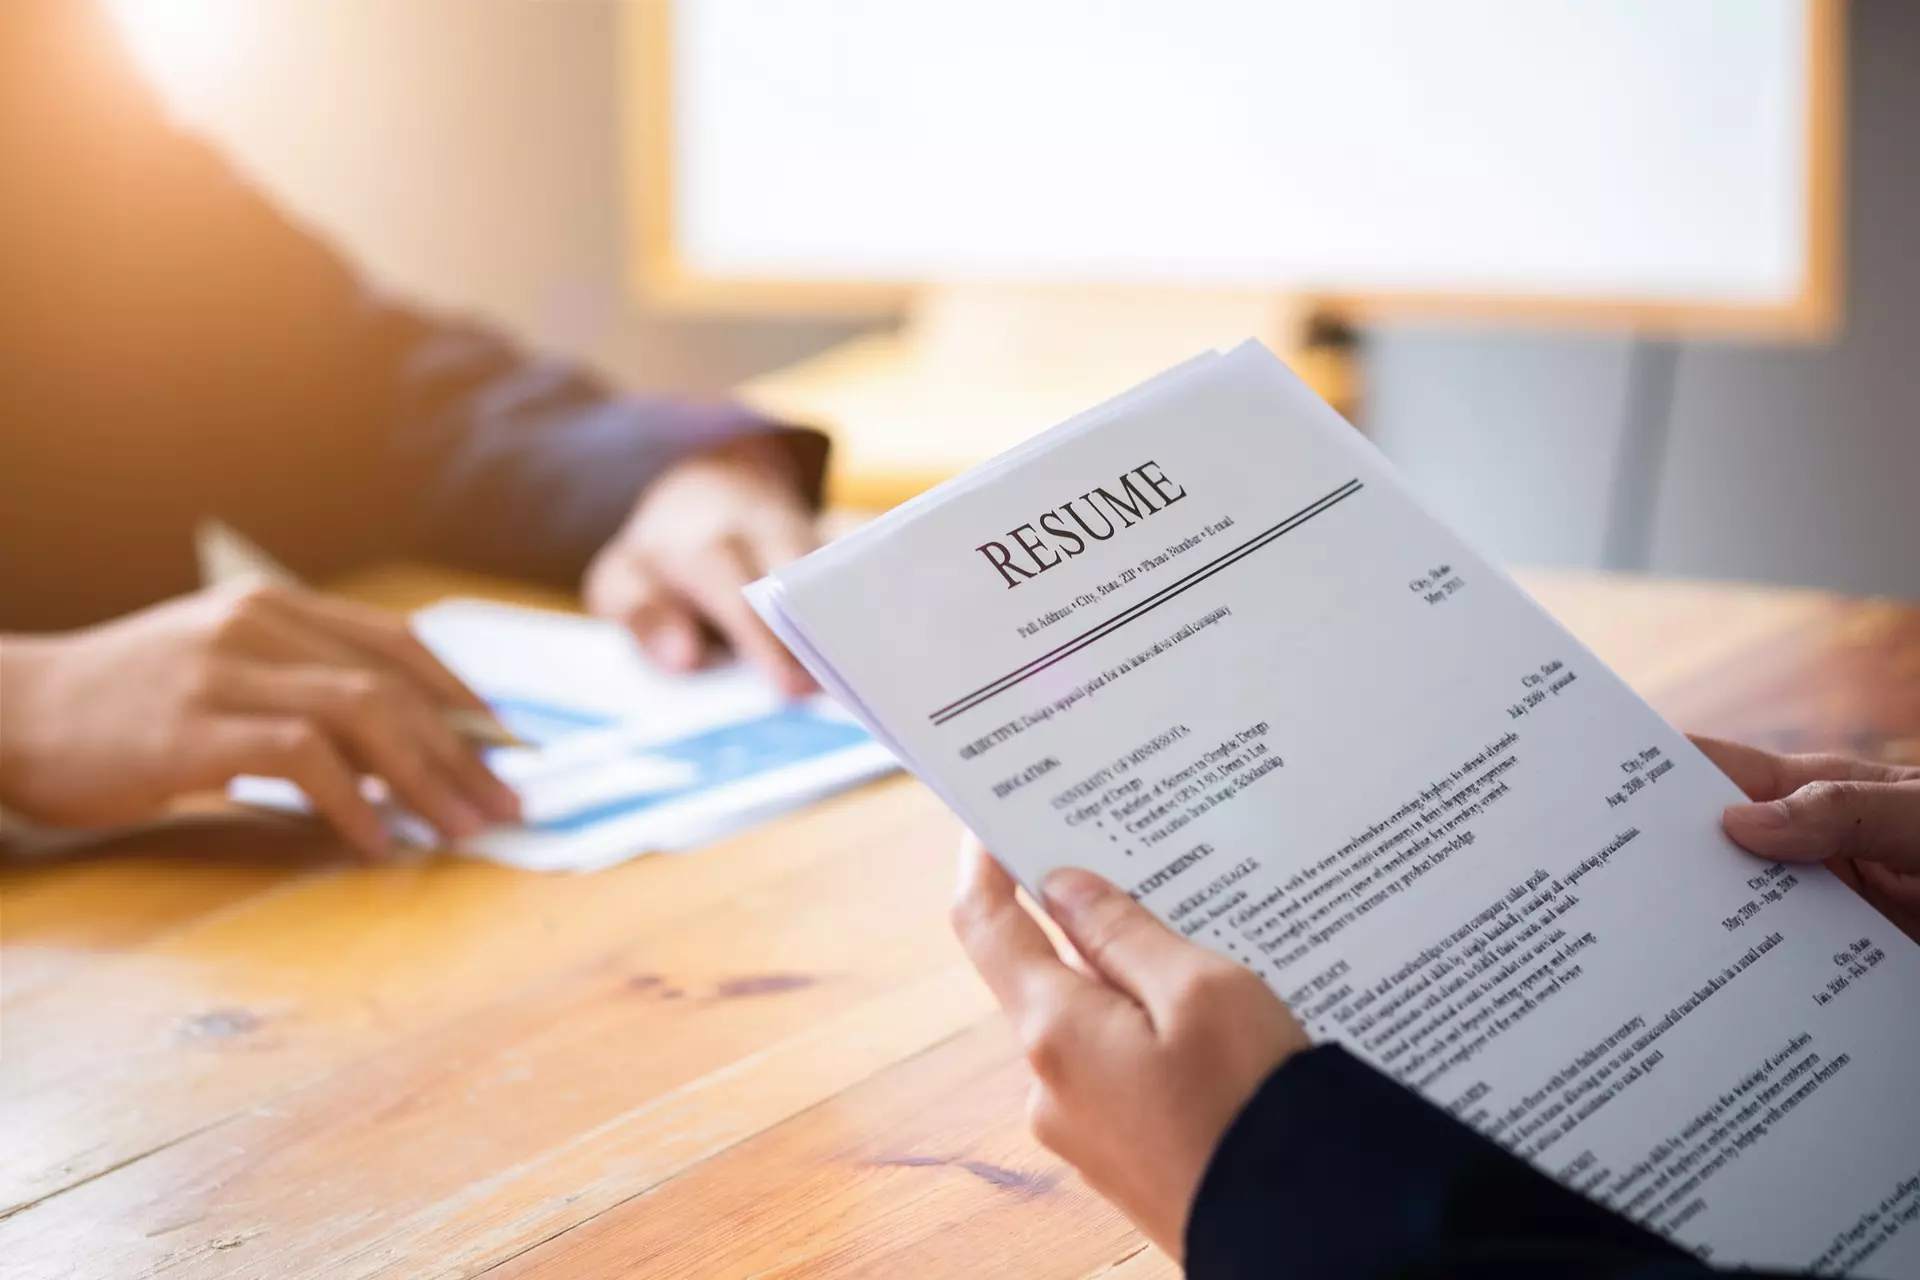 What Are The Best Resume Building Services For Executives?